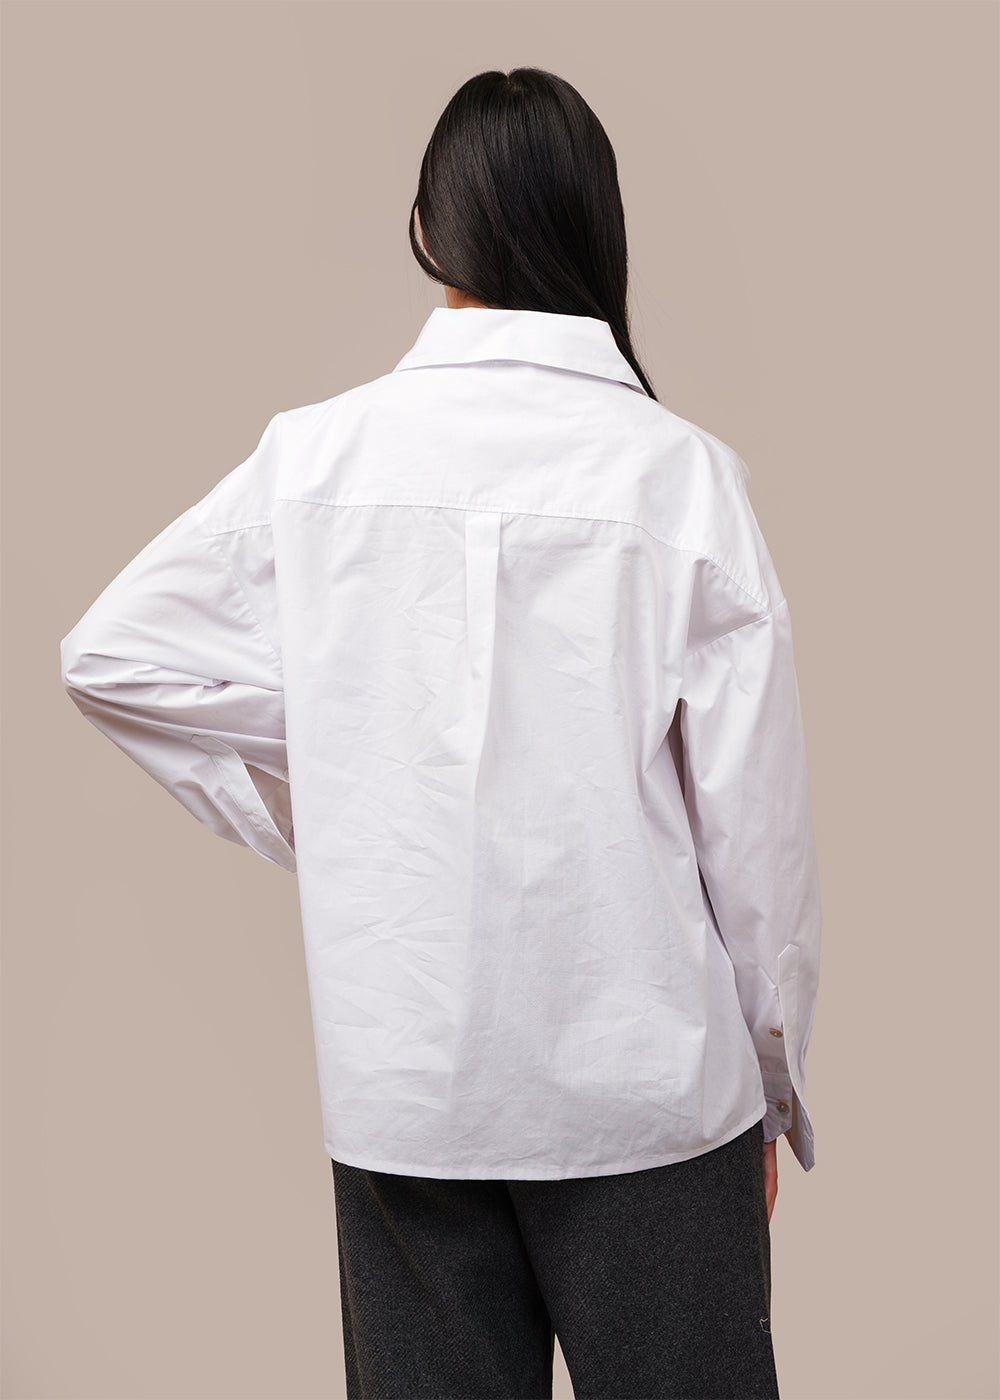 By Signe White Una Shirt - New Classics Studios Sustainable Ethical Fashion Canada